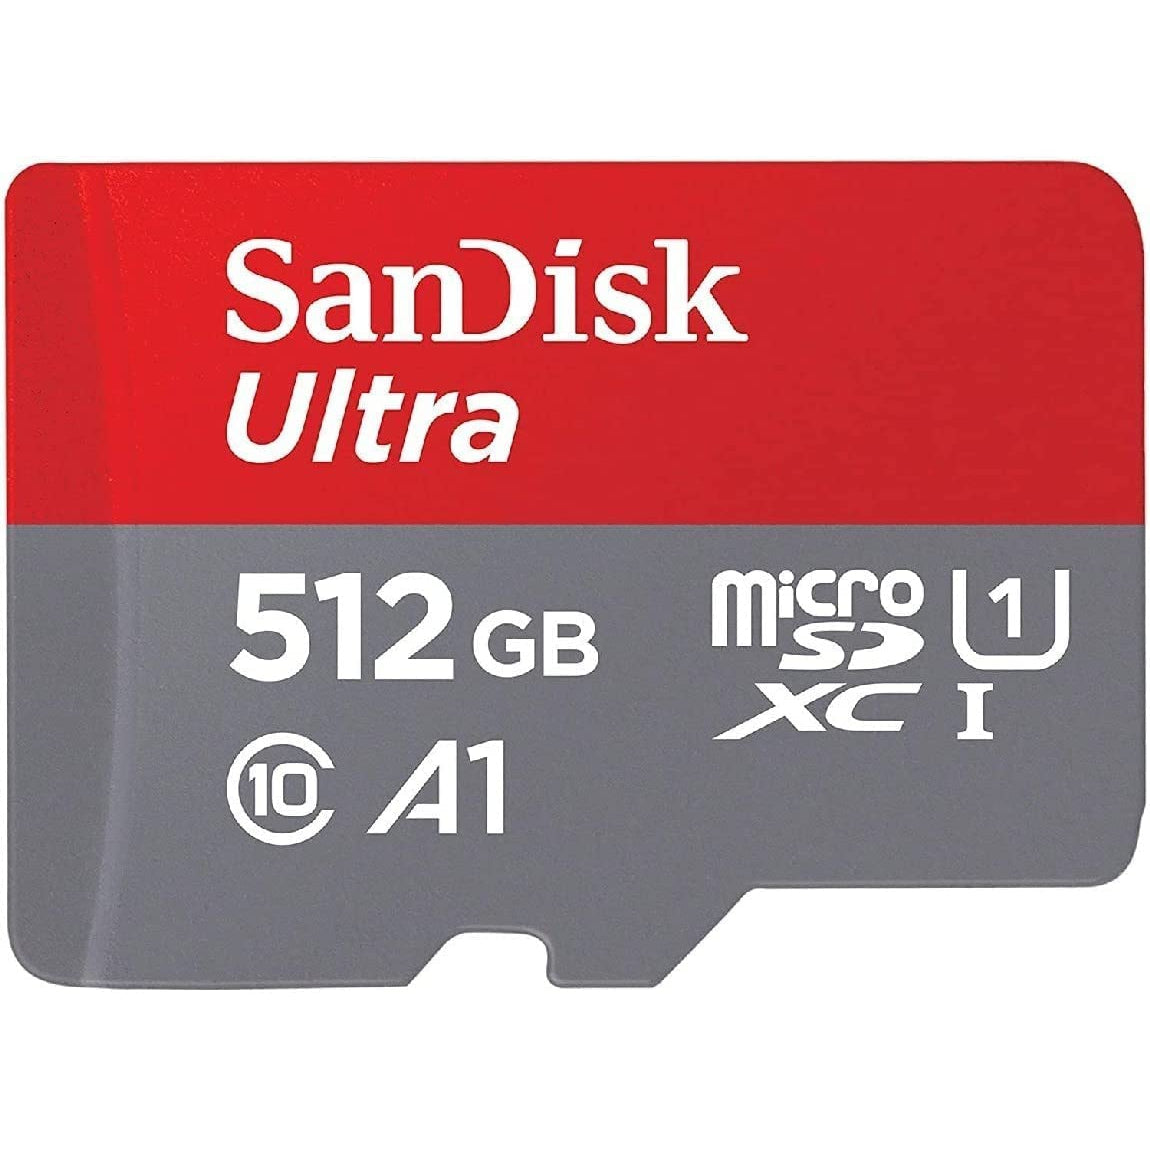 SanDisk Ultra 512GB microSDXC Memory Card + SD Adapter, Up to 120 MB/s, Class 10, U1